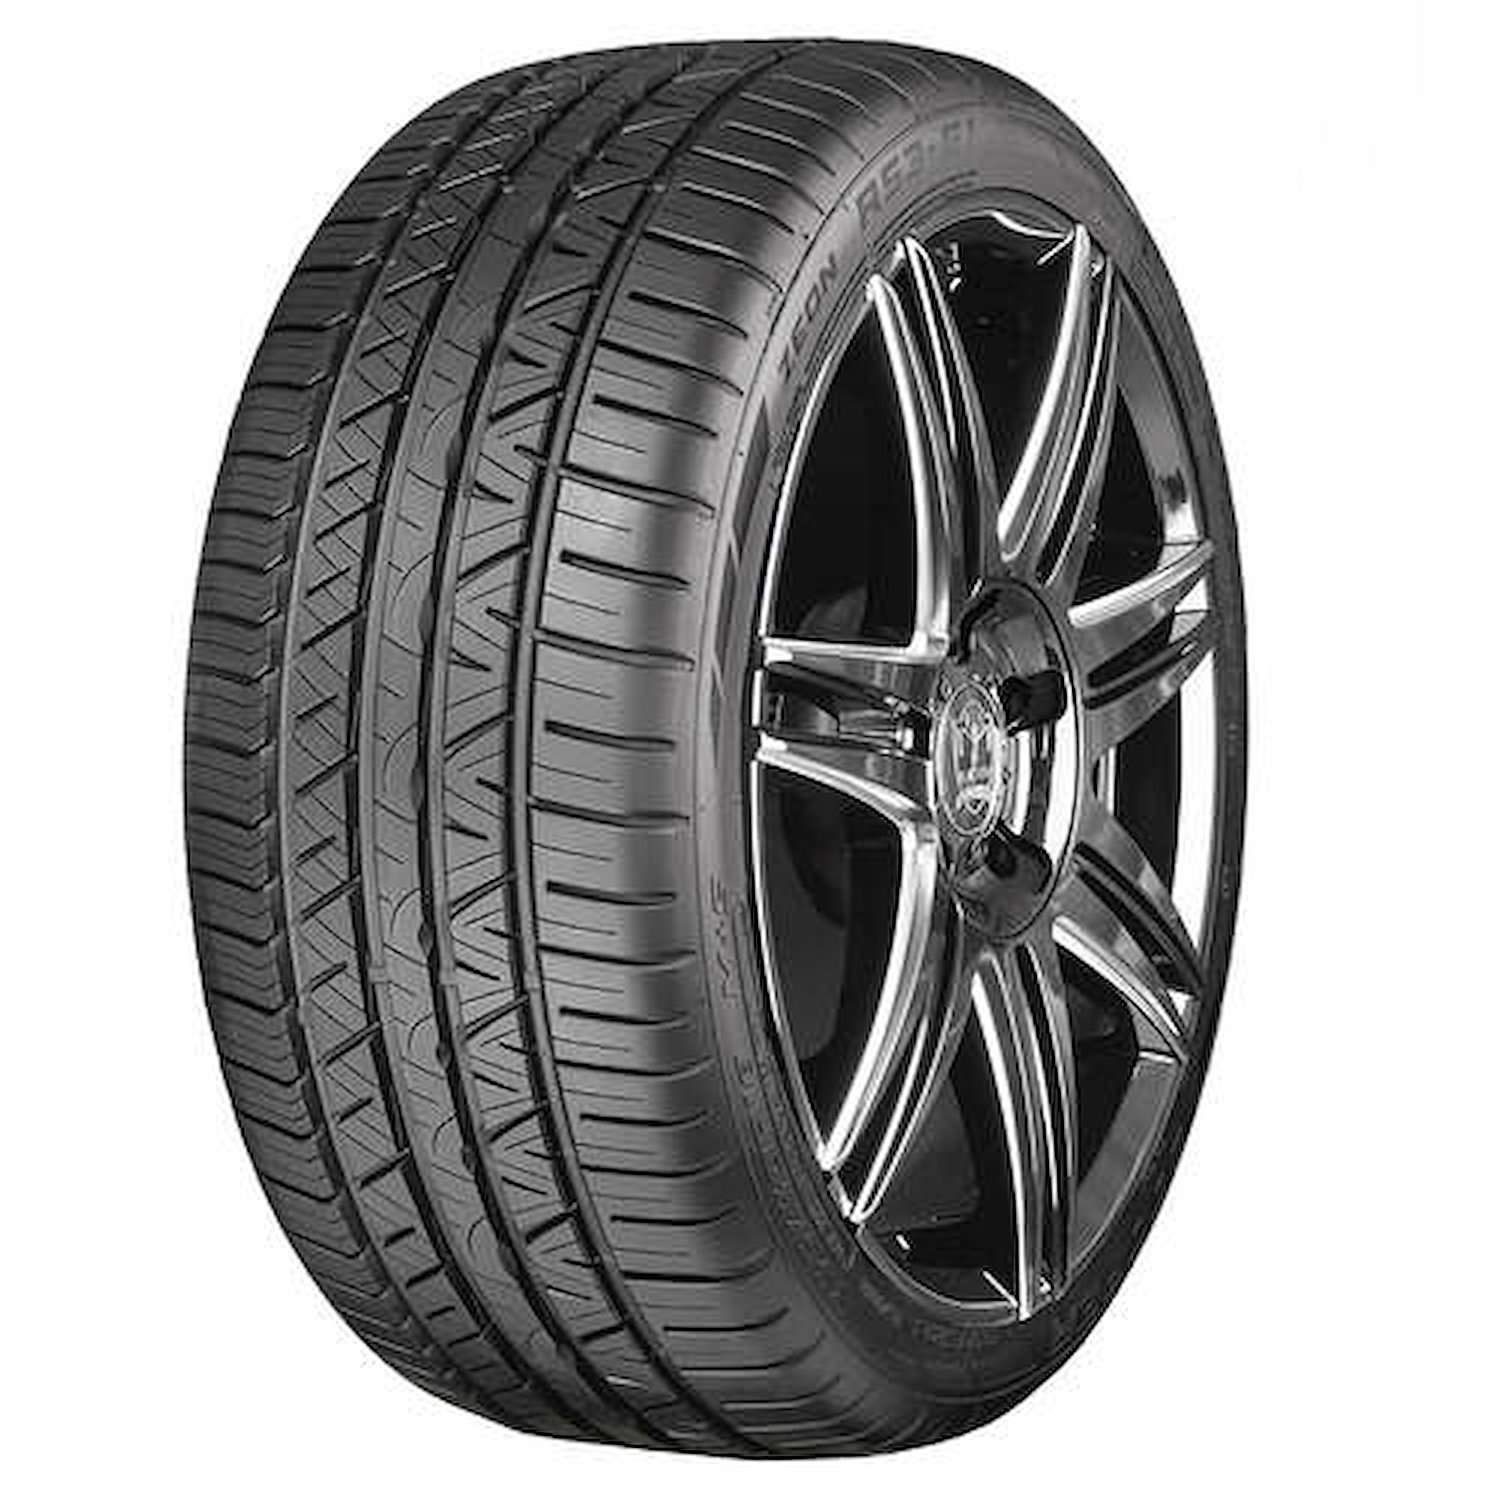 Zeon RS3-G1 High-Performance Tire, 235/45R17